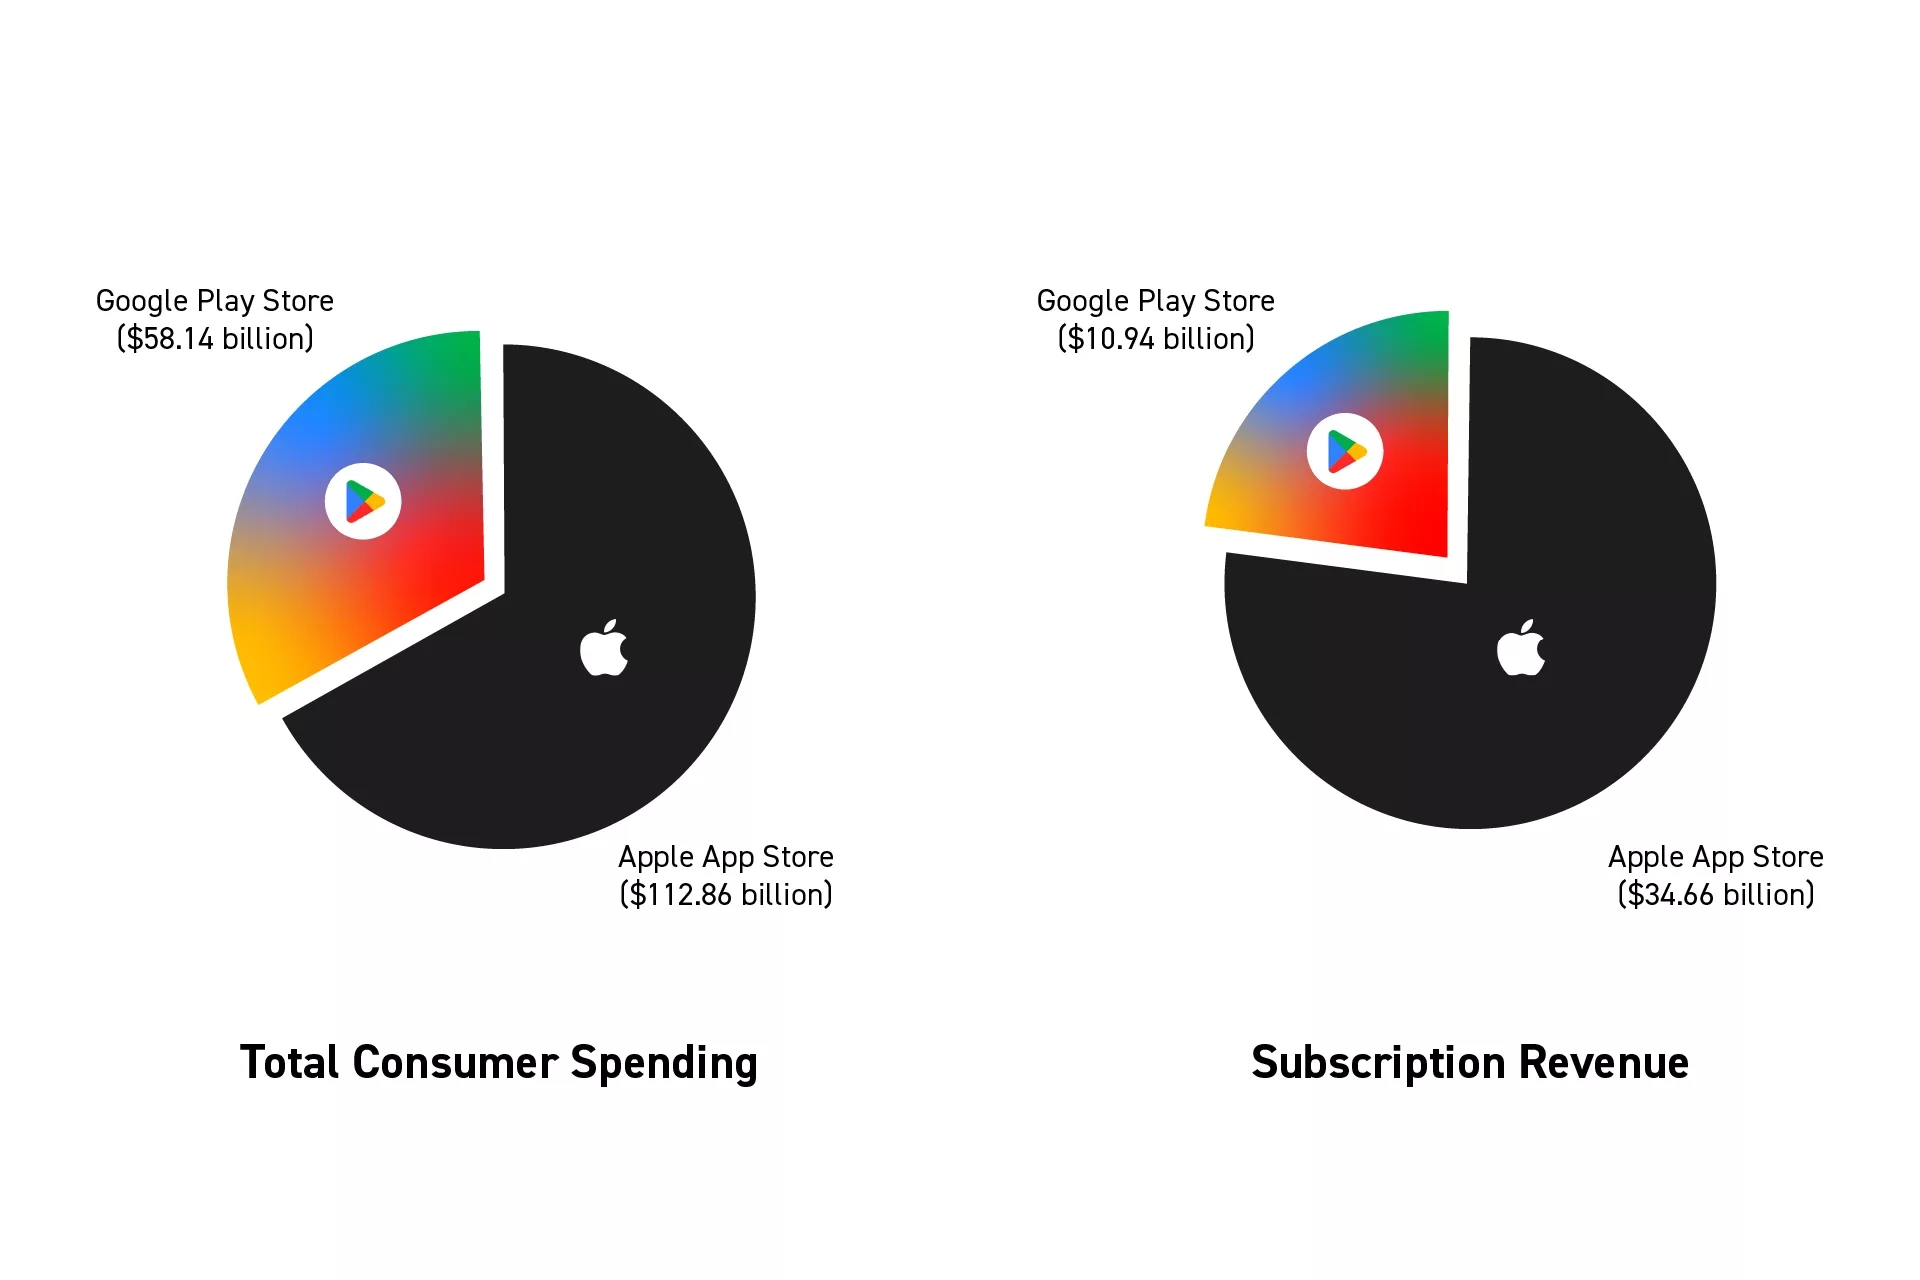 In terms of total consumer spending, Apple takes 66% valued at $112.86 billion compared to Google's 34% valued at $58.14 billion. In terms of subscription revenue, Apple takes 76% valued at $34.66 billion compared to Google's 24% valued at $10.94 billion.